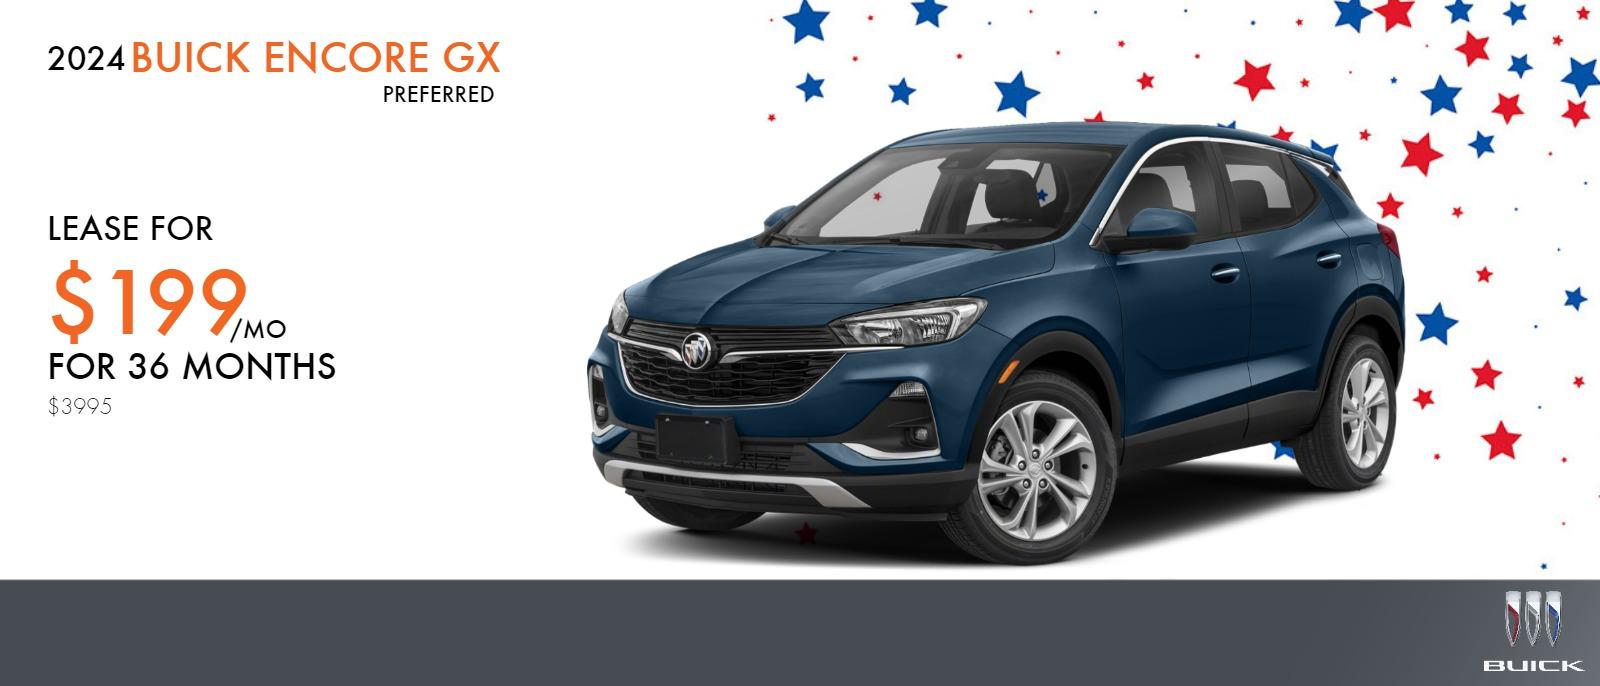 2024 BUICK ENCORE GX PREFERRED FWD
$199 | 36 MONTHS | $3995